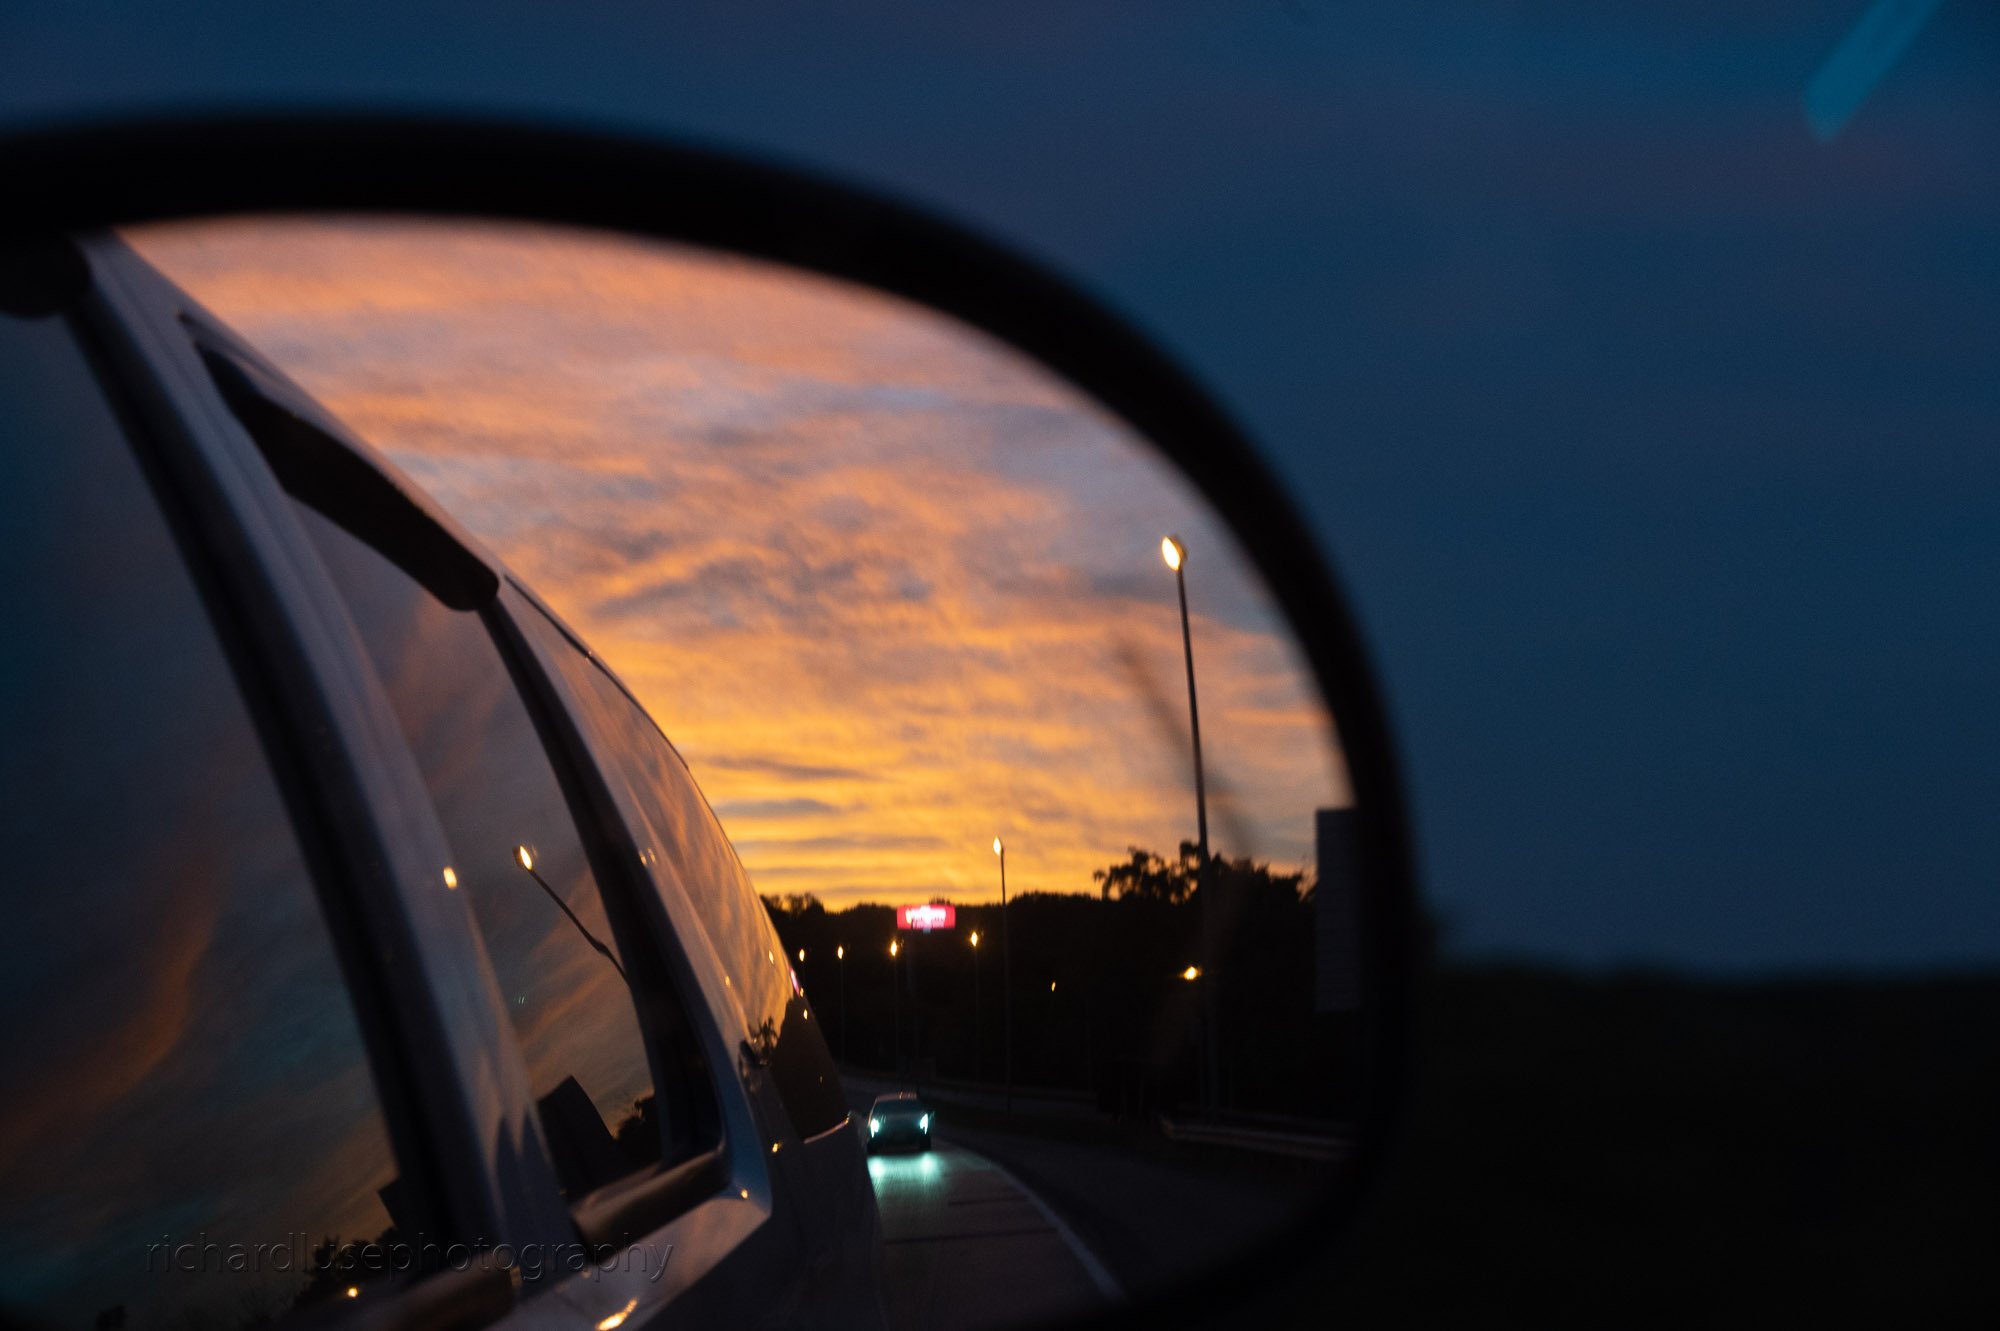 Sunset in the rear view on the final leg home.